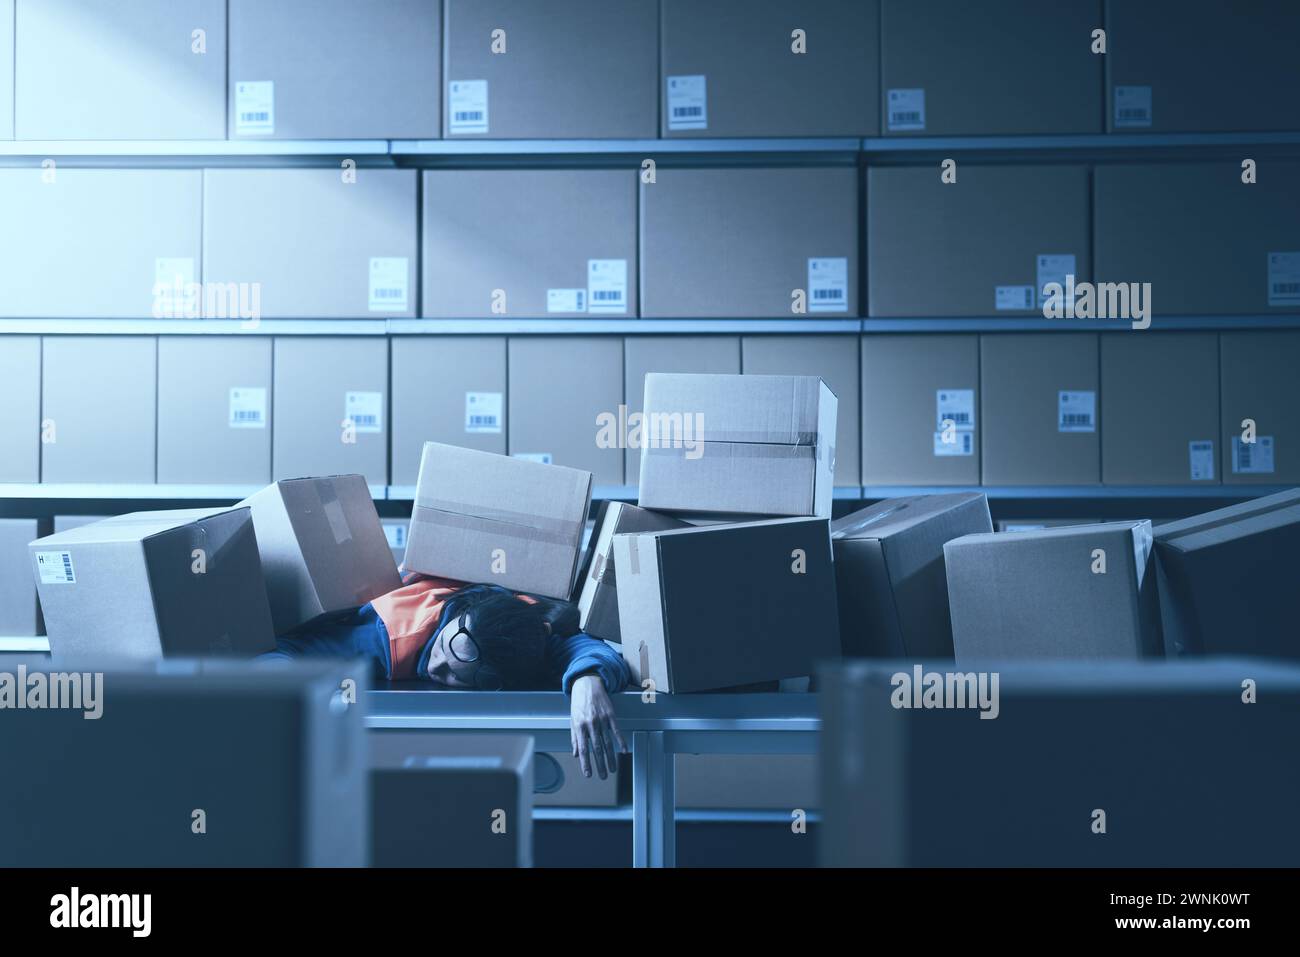 Injured warehouse worker lying under heavy boxes, accidents in the workplace concept Stock Photo